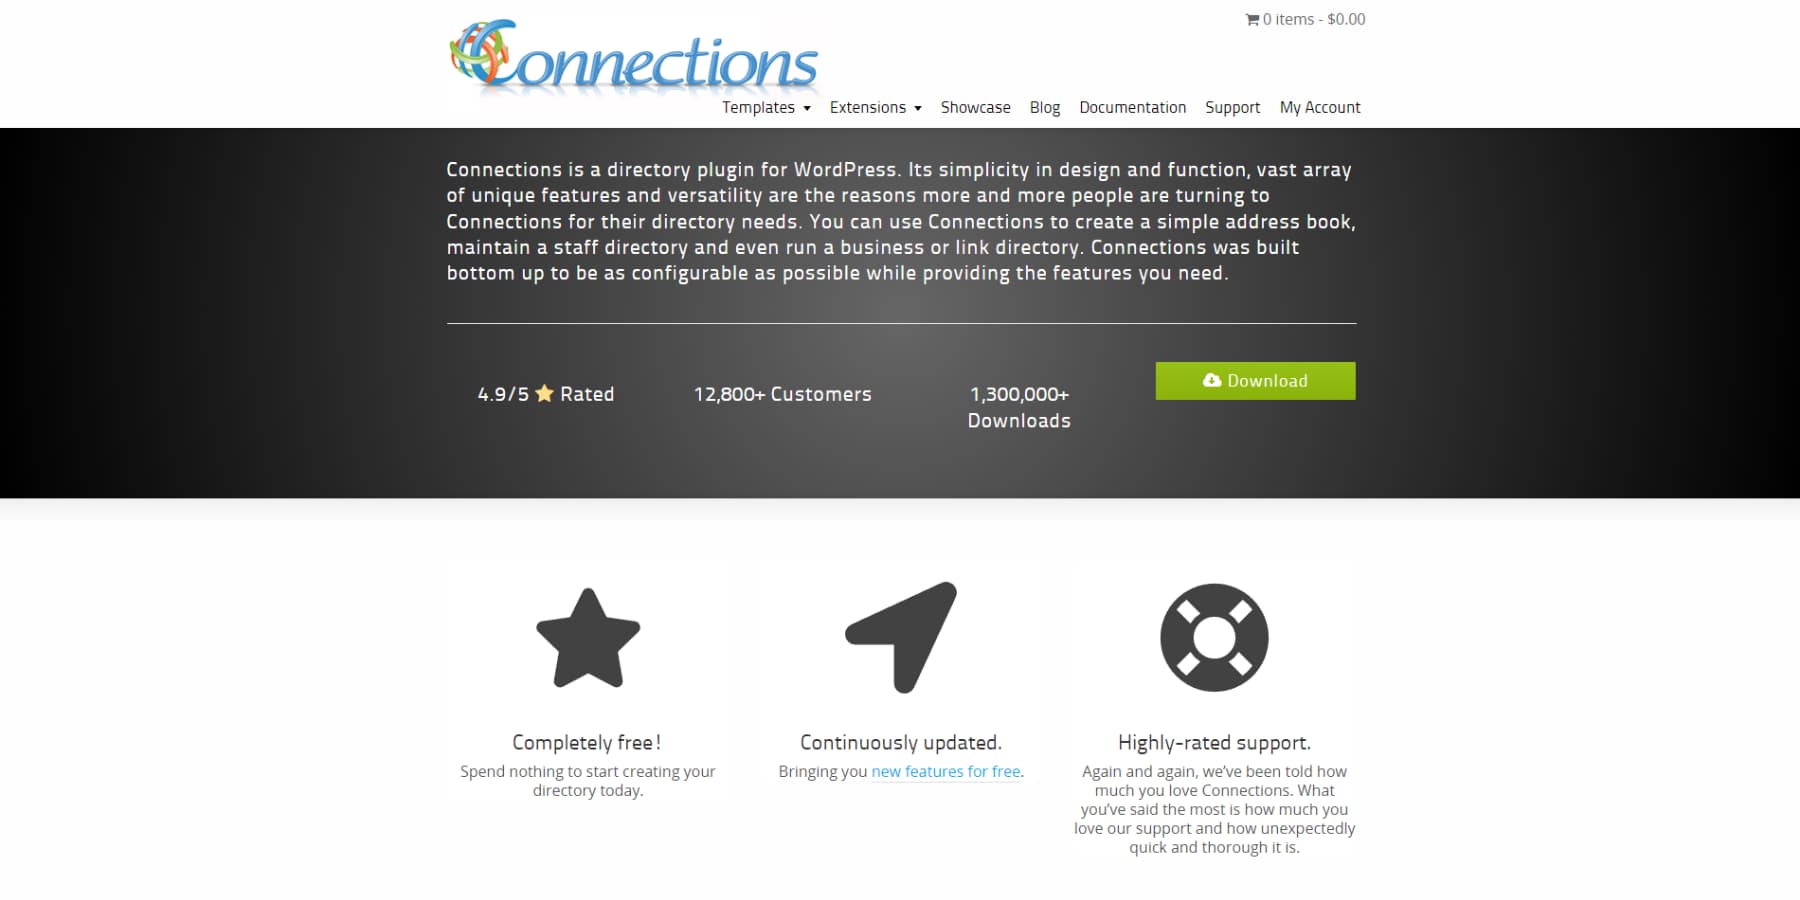 A screenshot of Connections' homepage